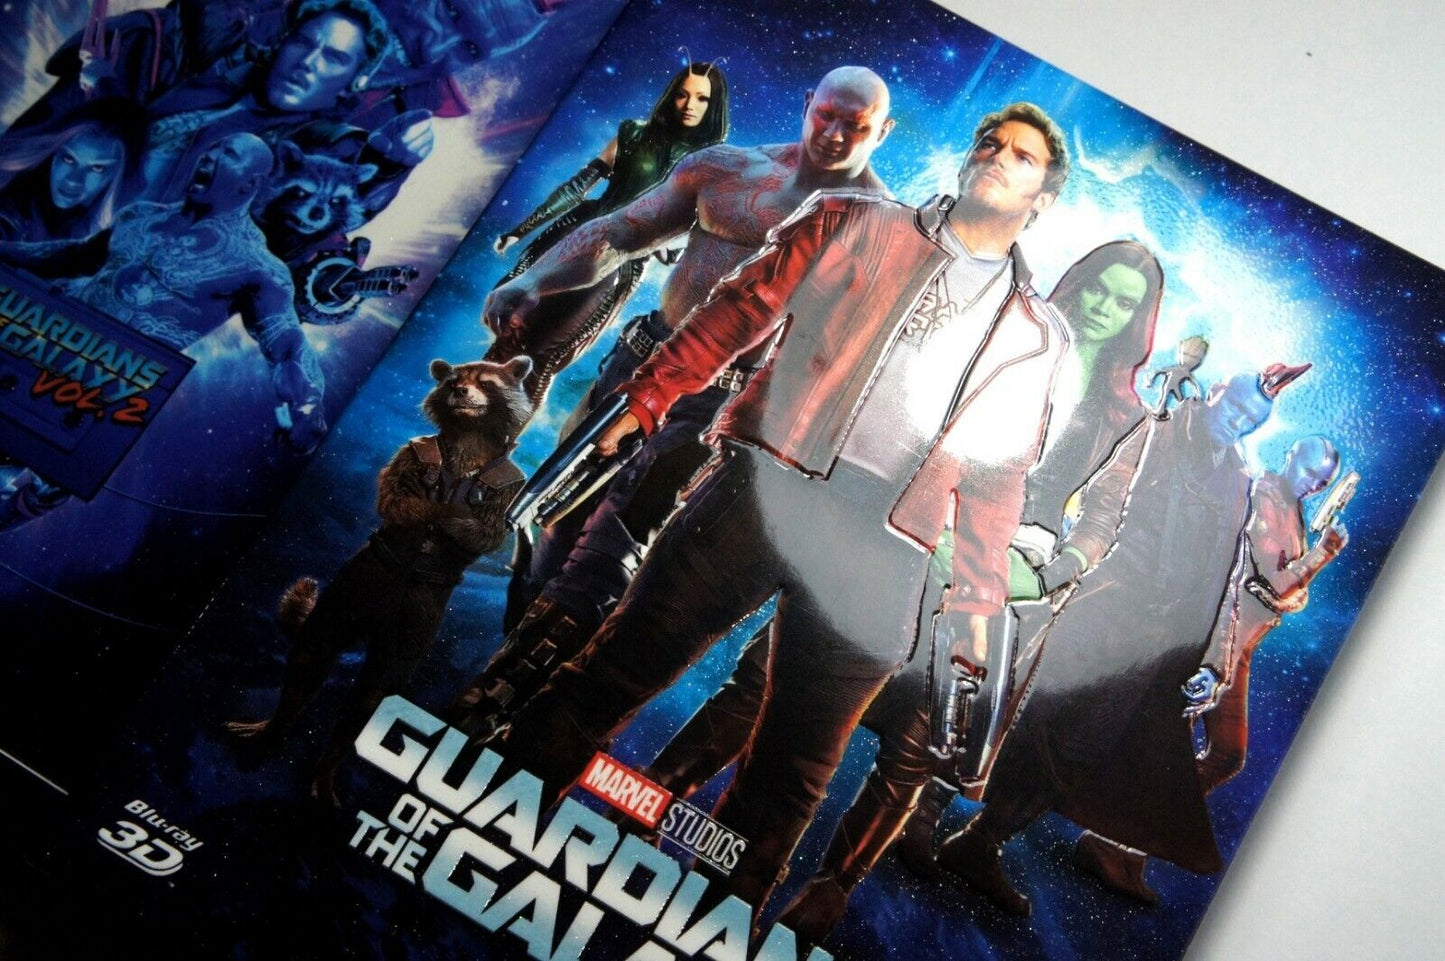 Guardians of the Galaxy Vol. 2 3D+2D Blu-ray Steelbook WeET Exclusive One Click Box Set